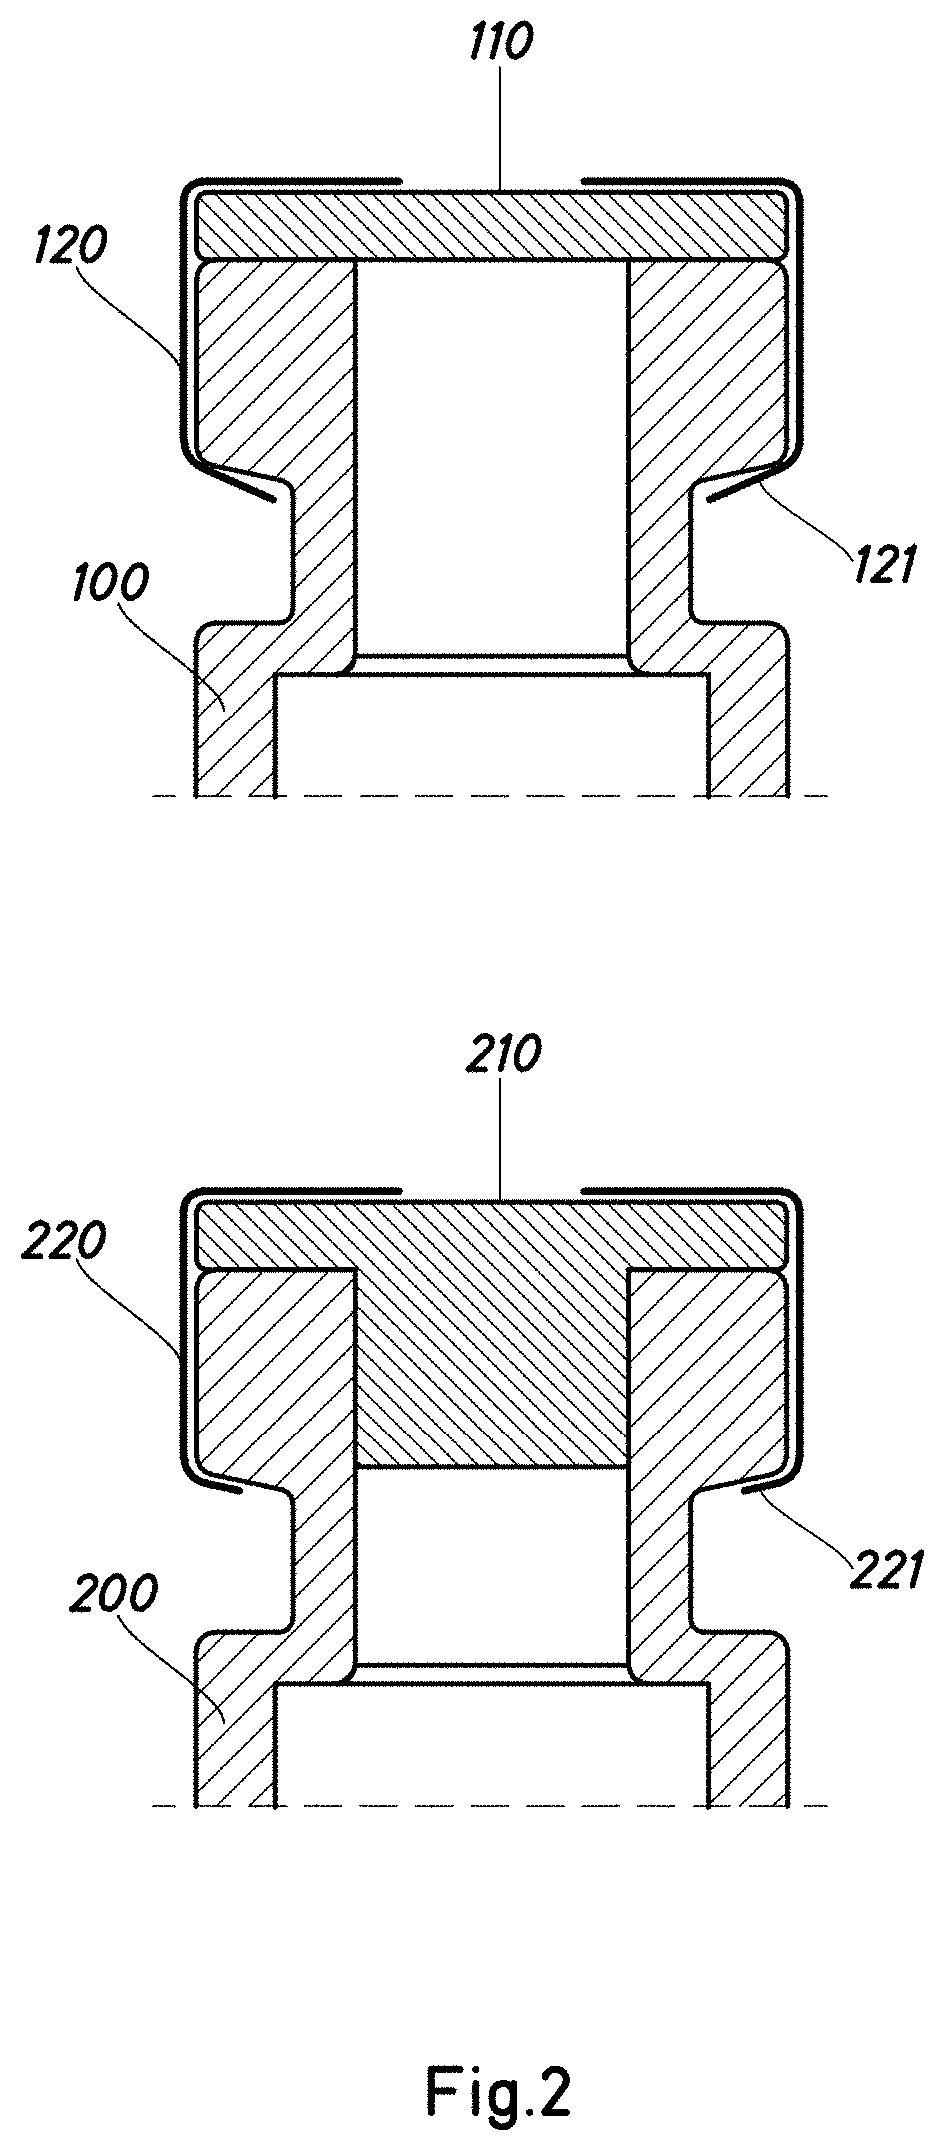 Method and device for detecting defects in the closure of encapsulated vials